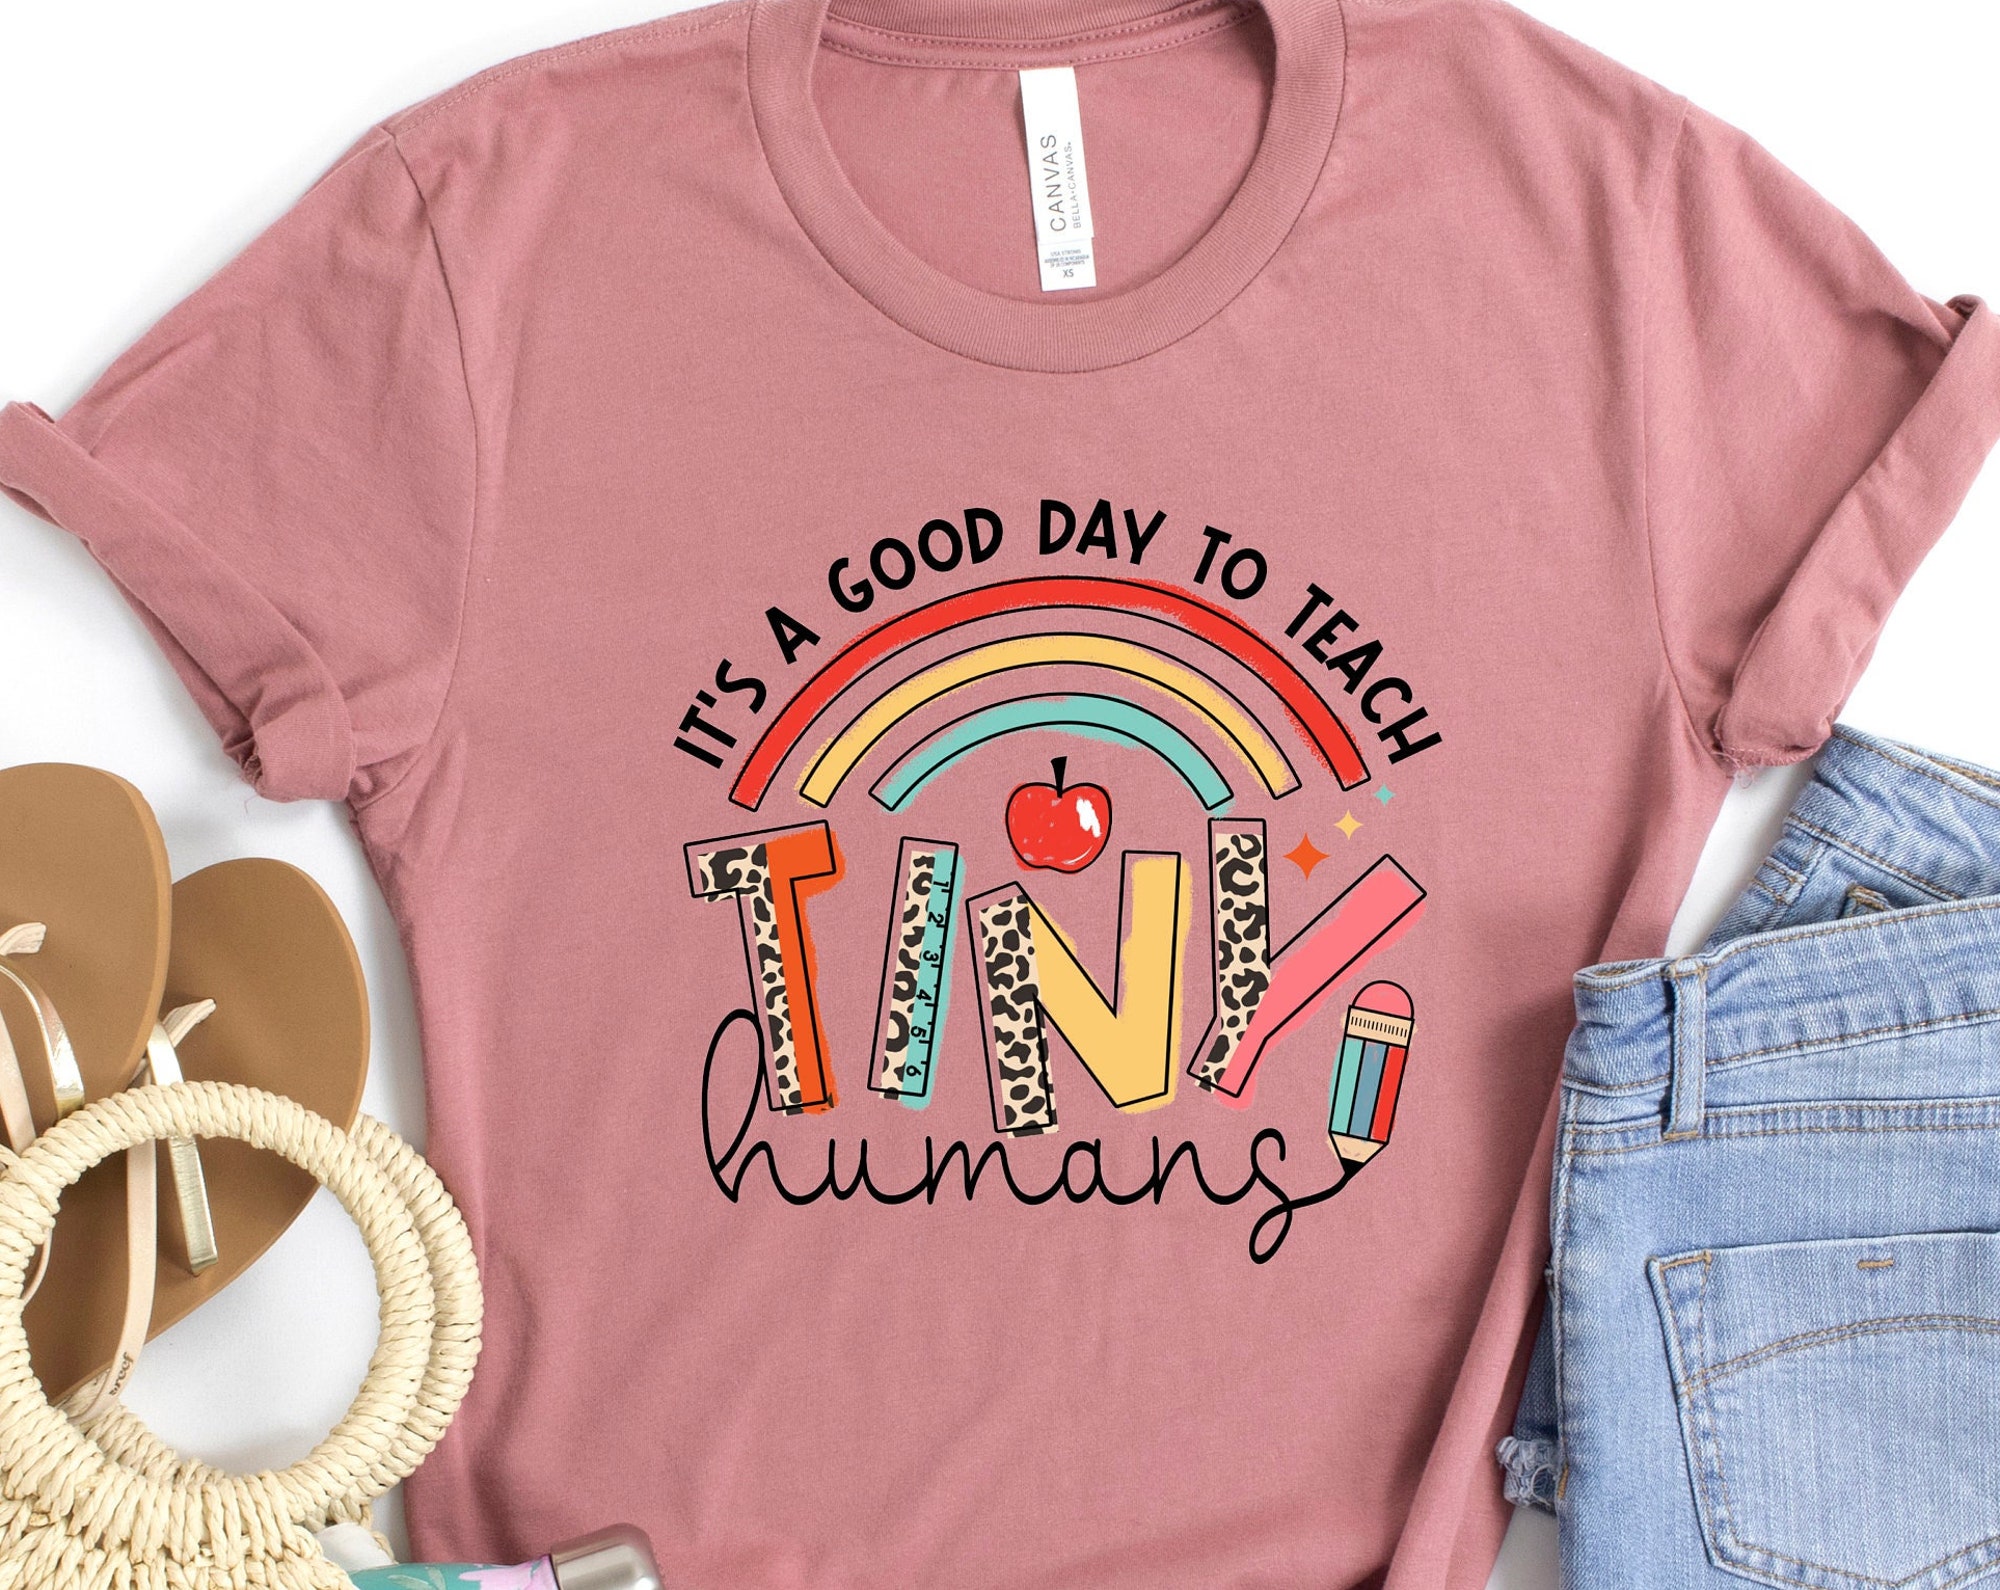 Discover It's A Good Day To Teach Tiny Humans Shirt